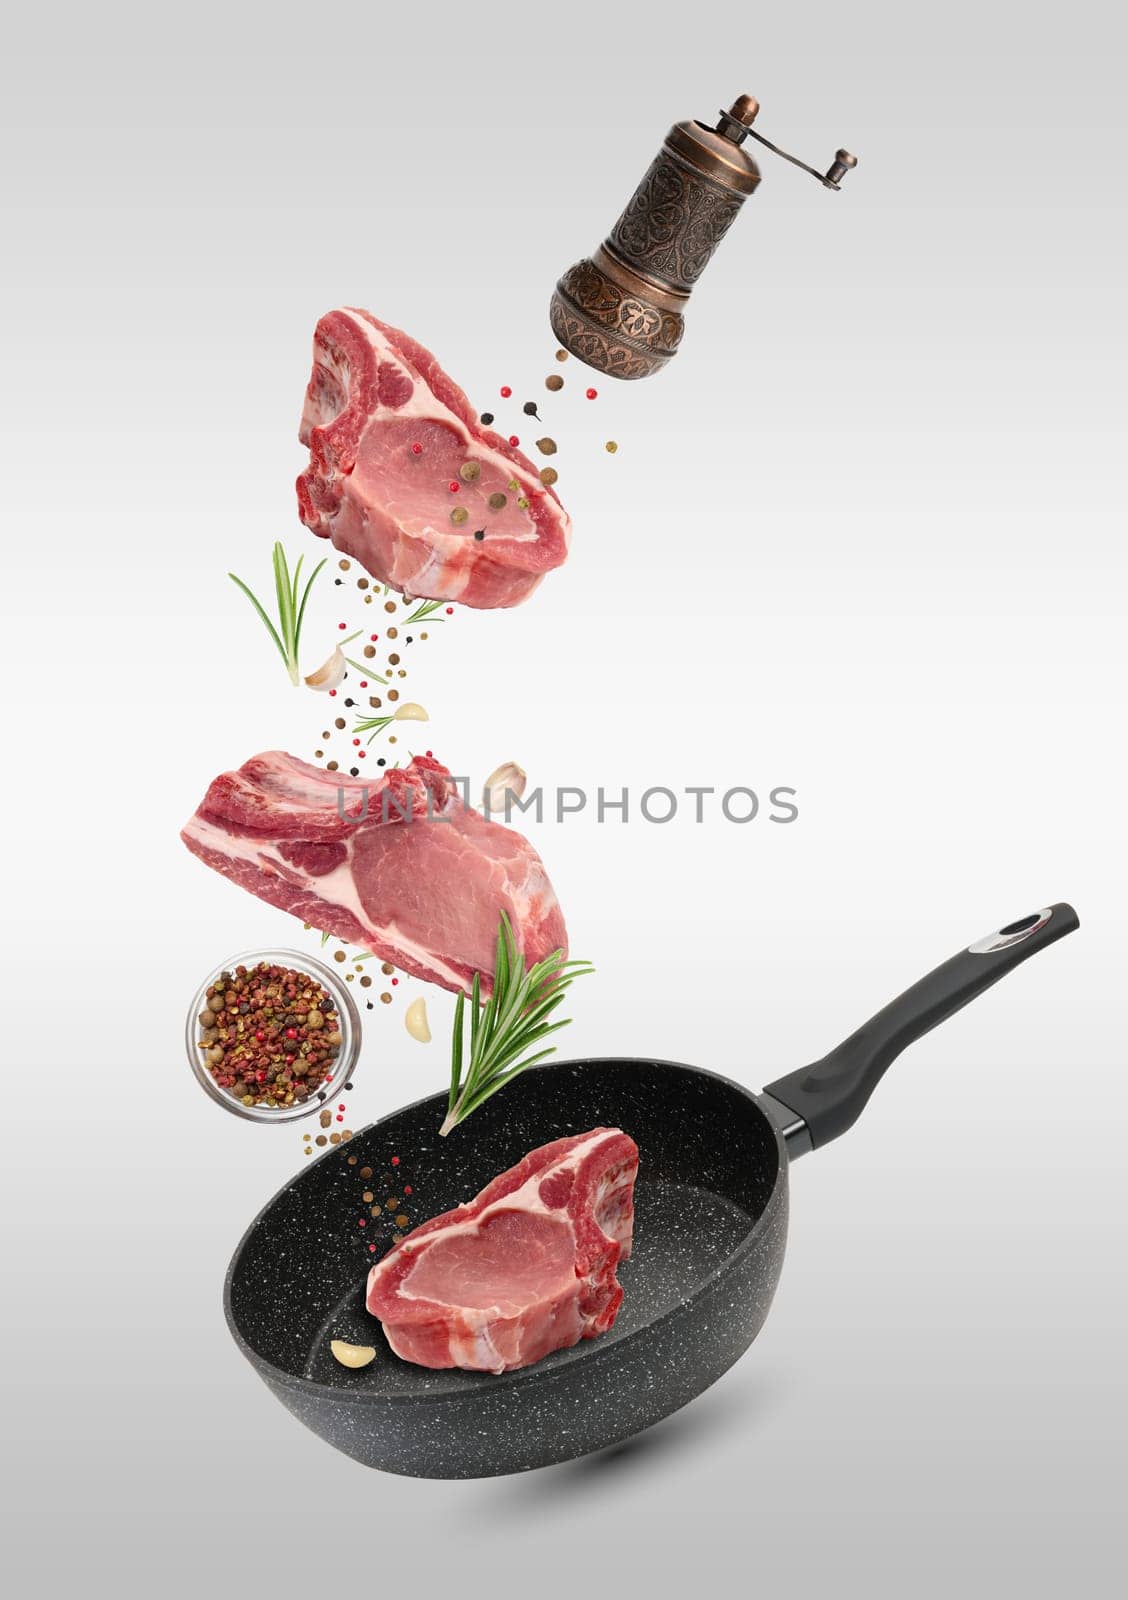 Levitating pieces of pork meat on a rib, spices. Cooking lunch